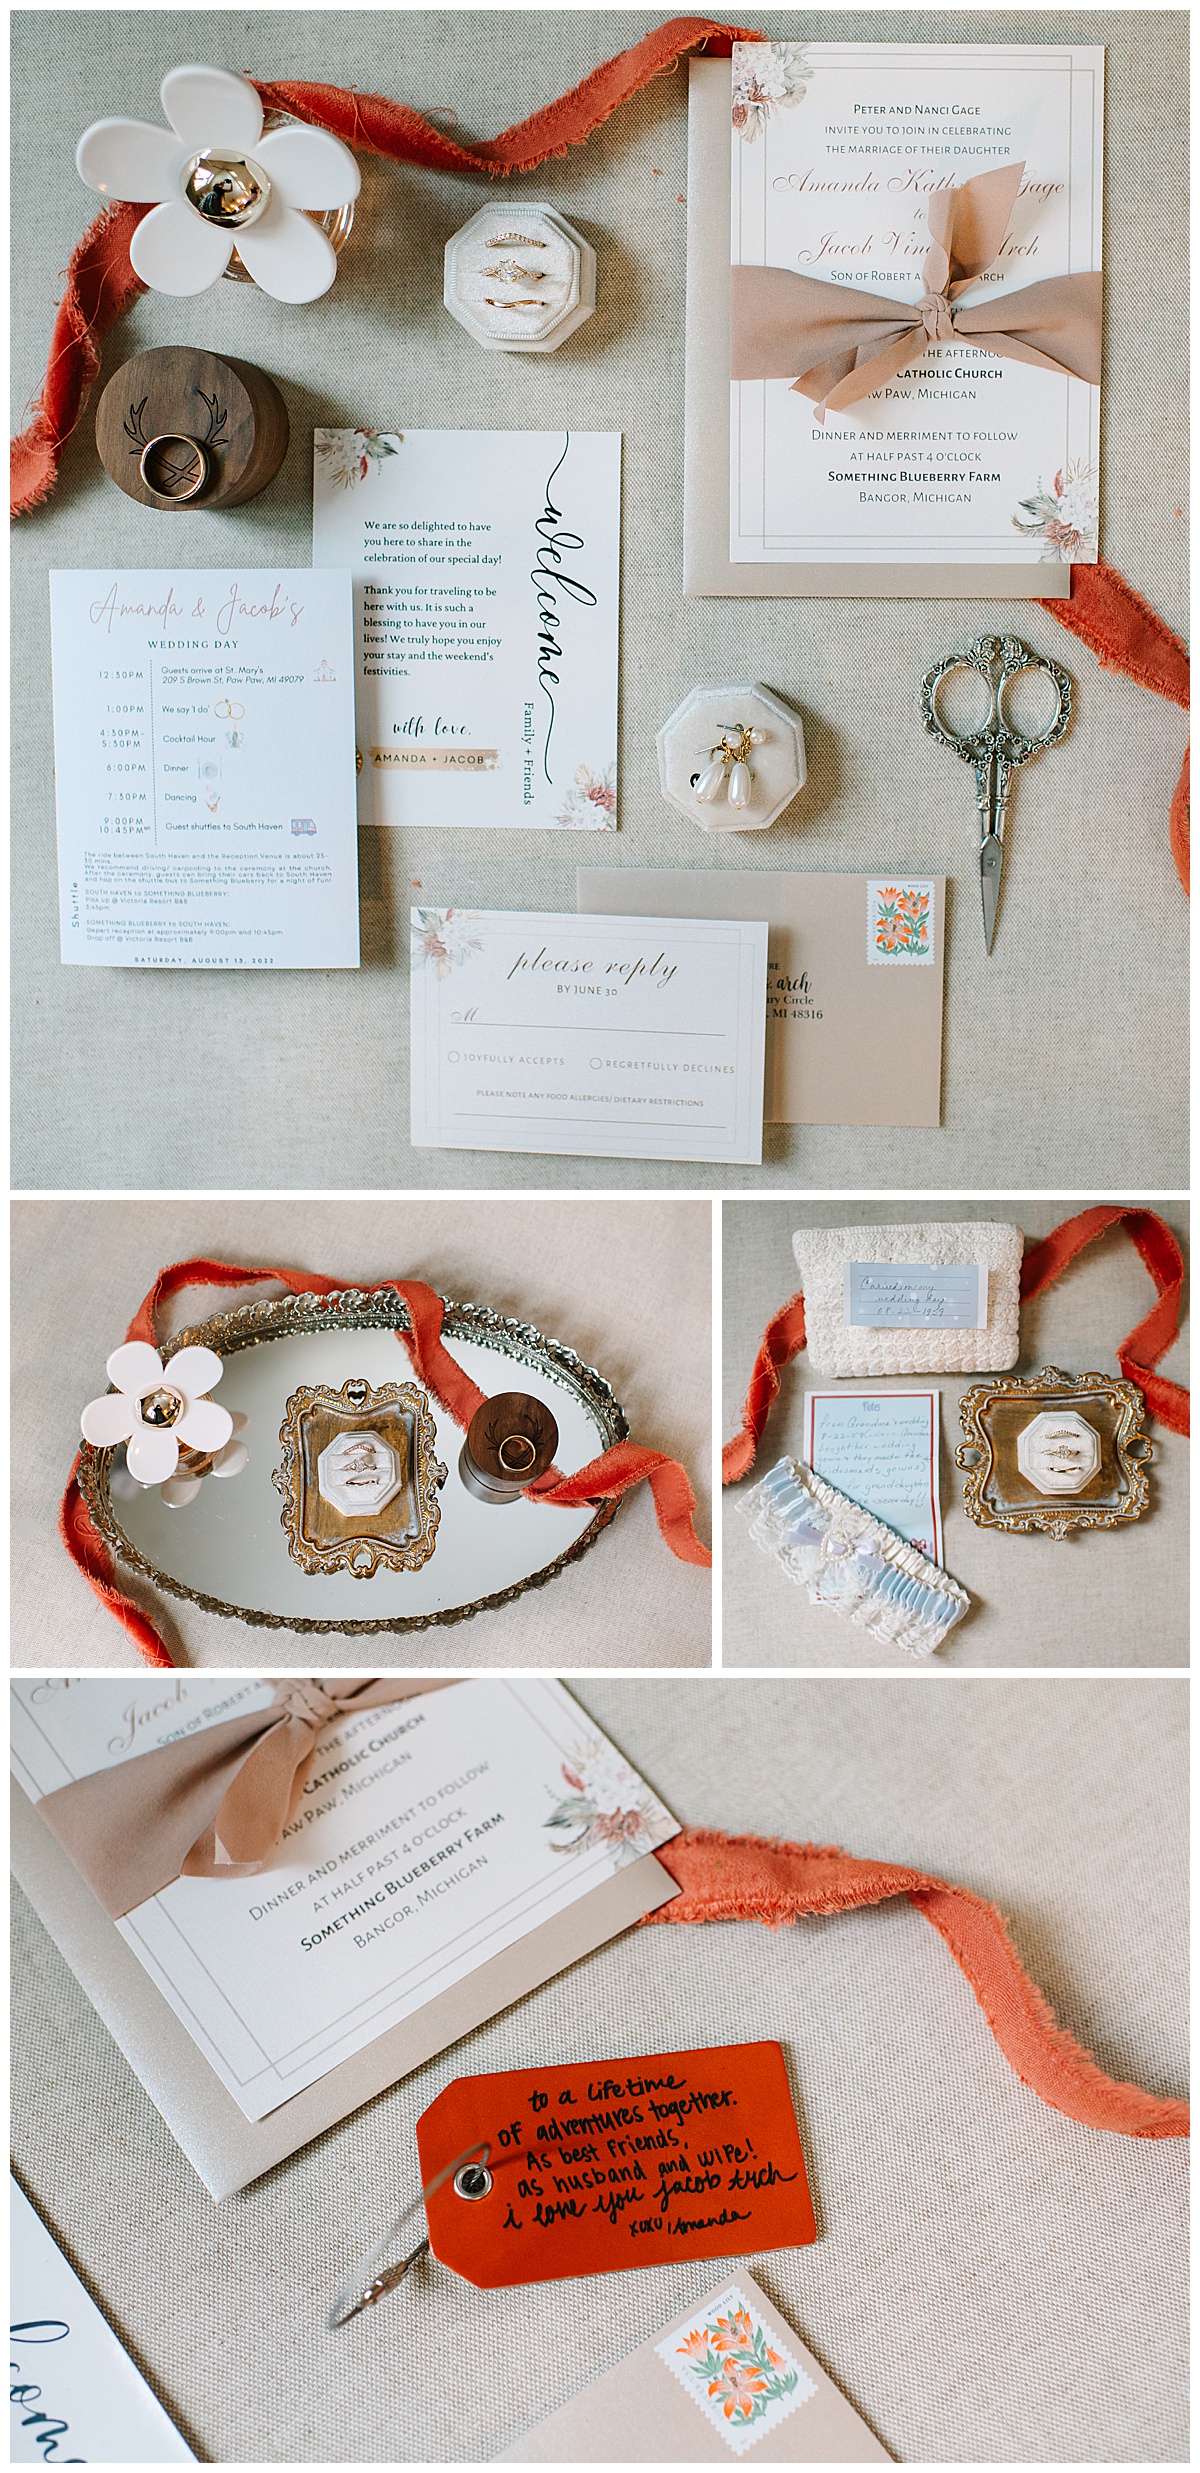 stationery details by Michigan Wedding Photographer